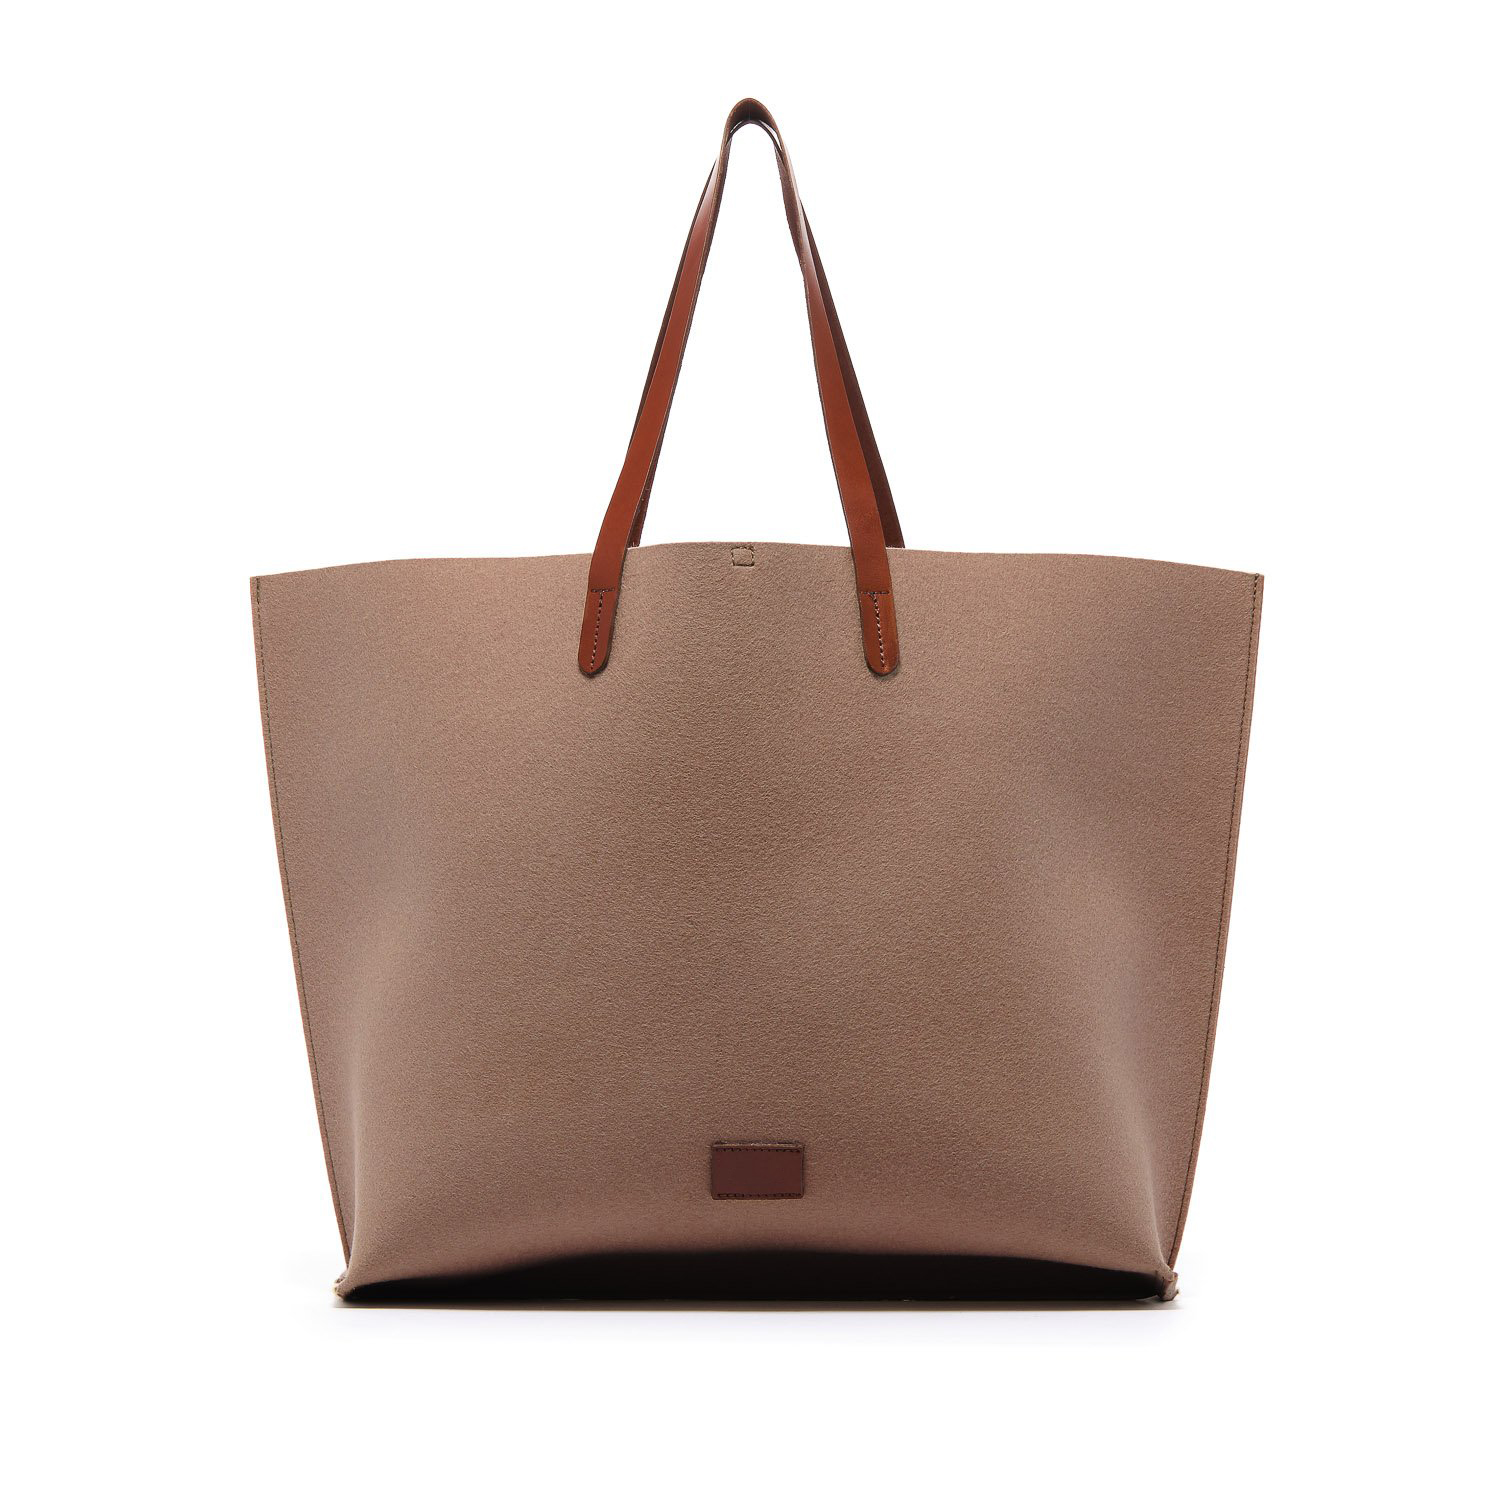 High-Quality Felt Tote Gift Bags: A Stylish and Practical Gift Option